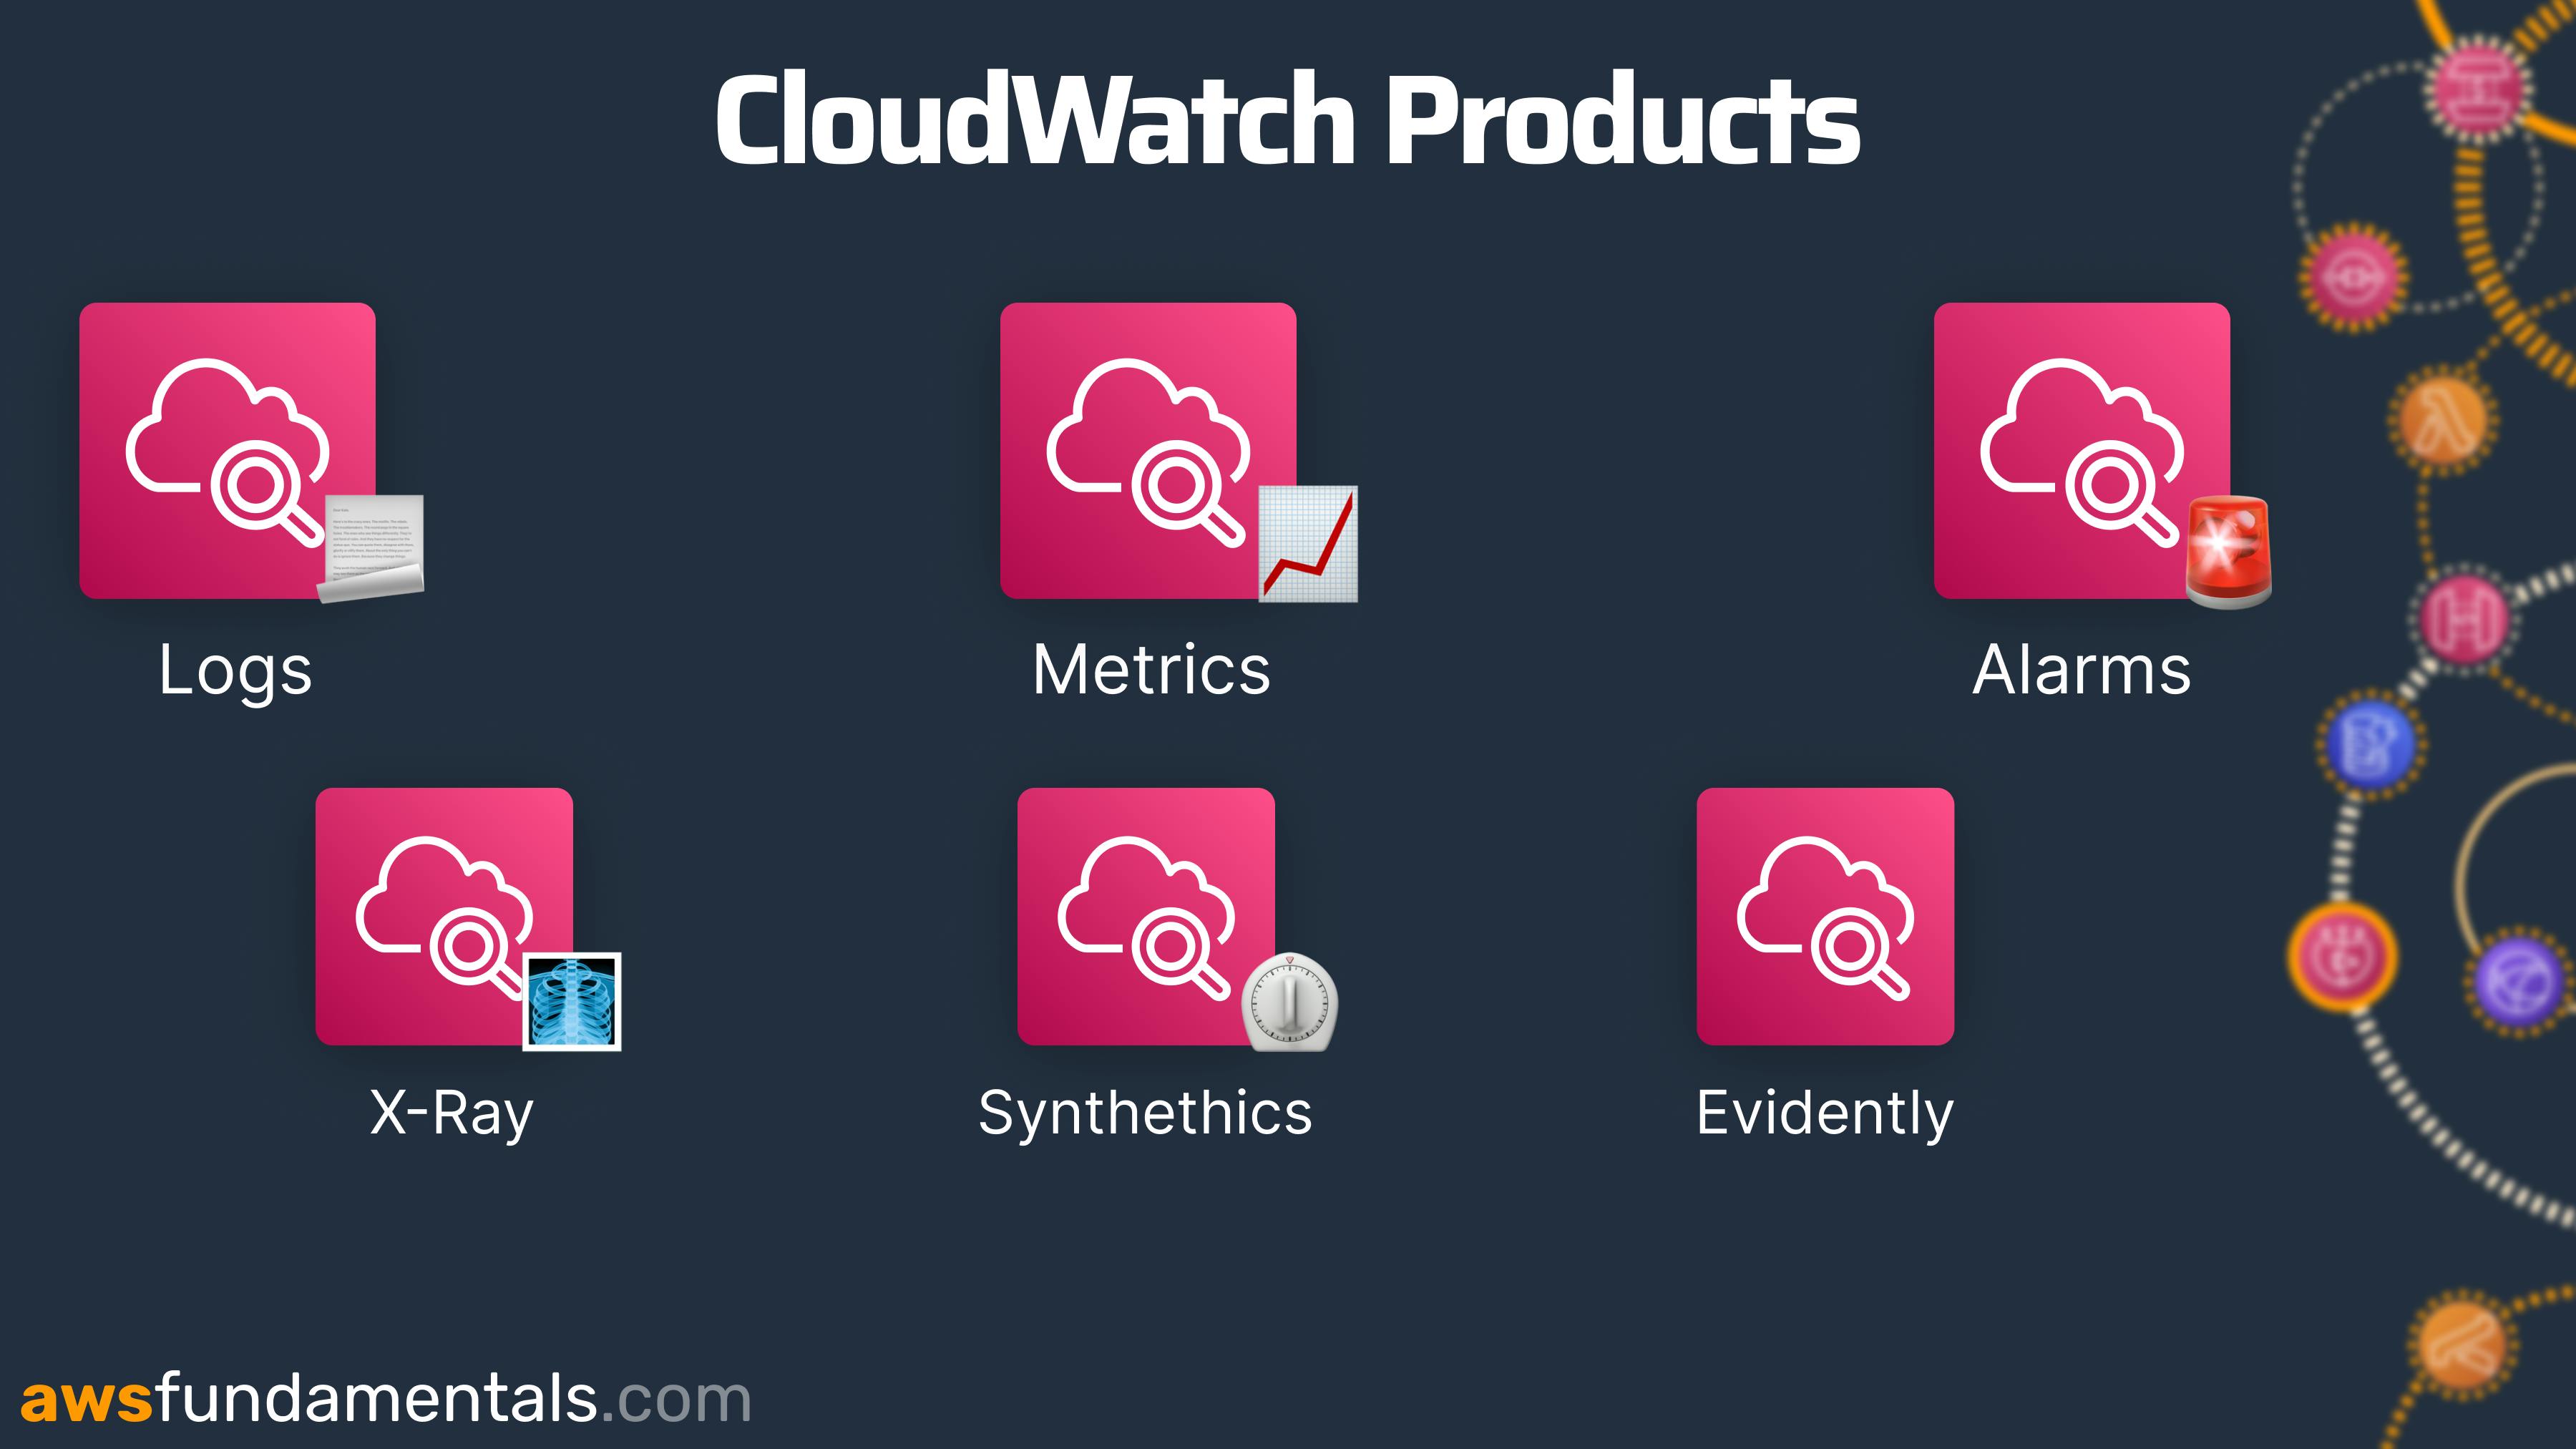 CloudWatch offers a variety of different products